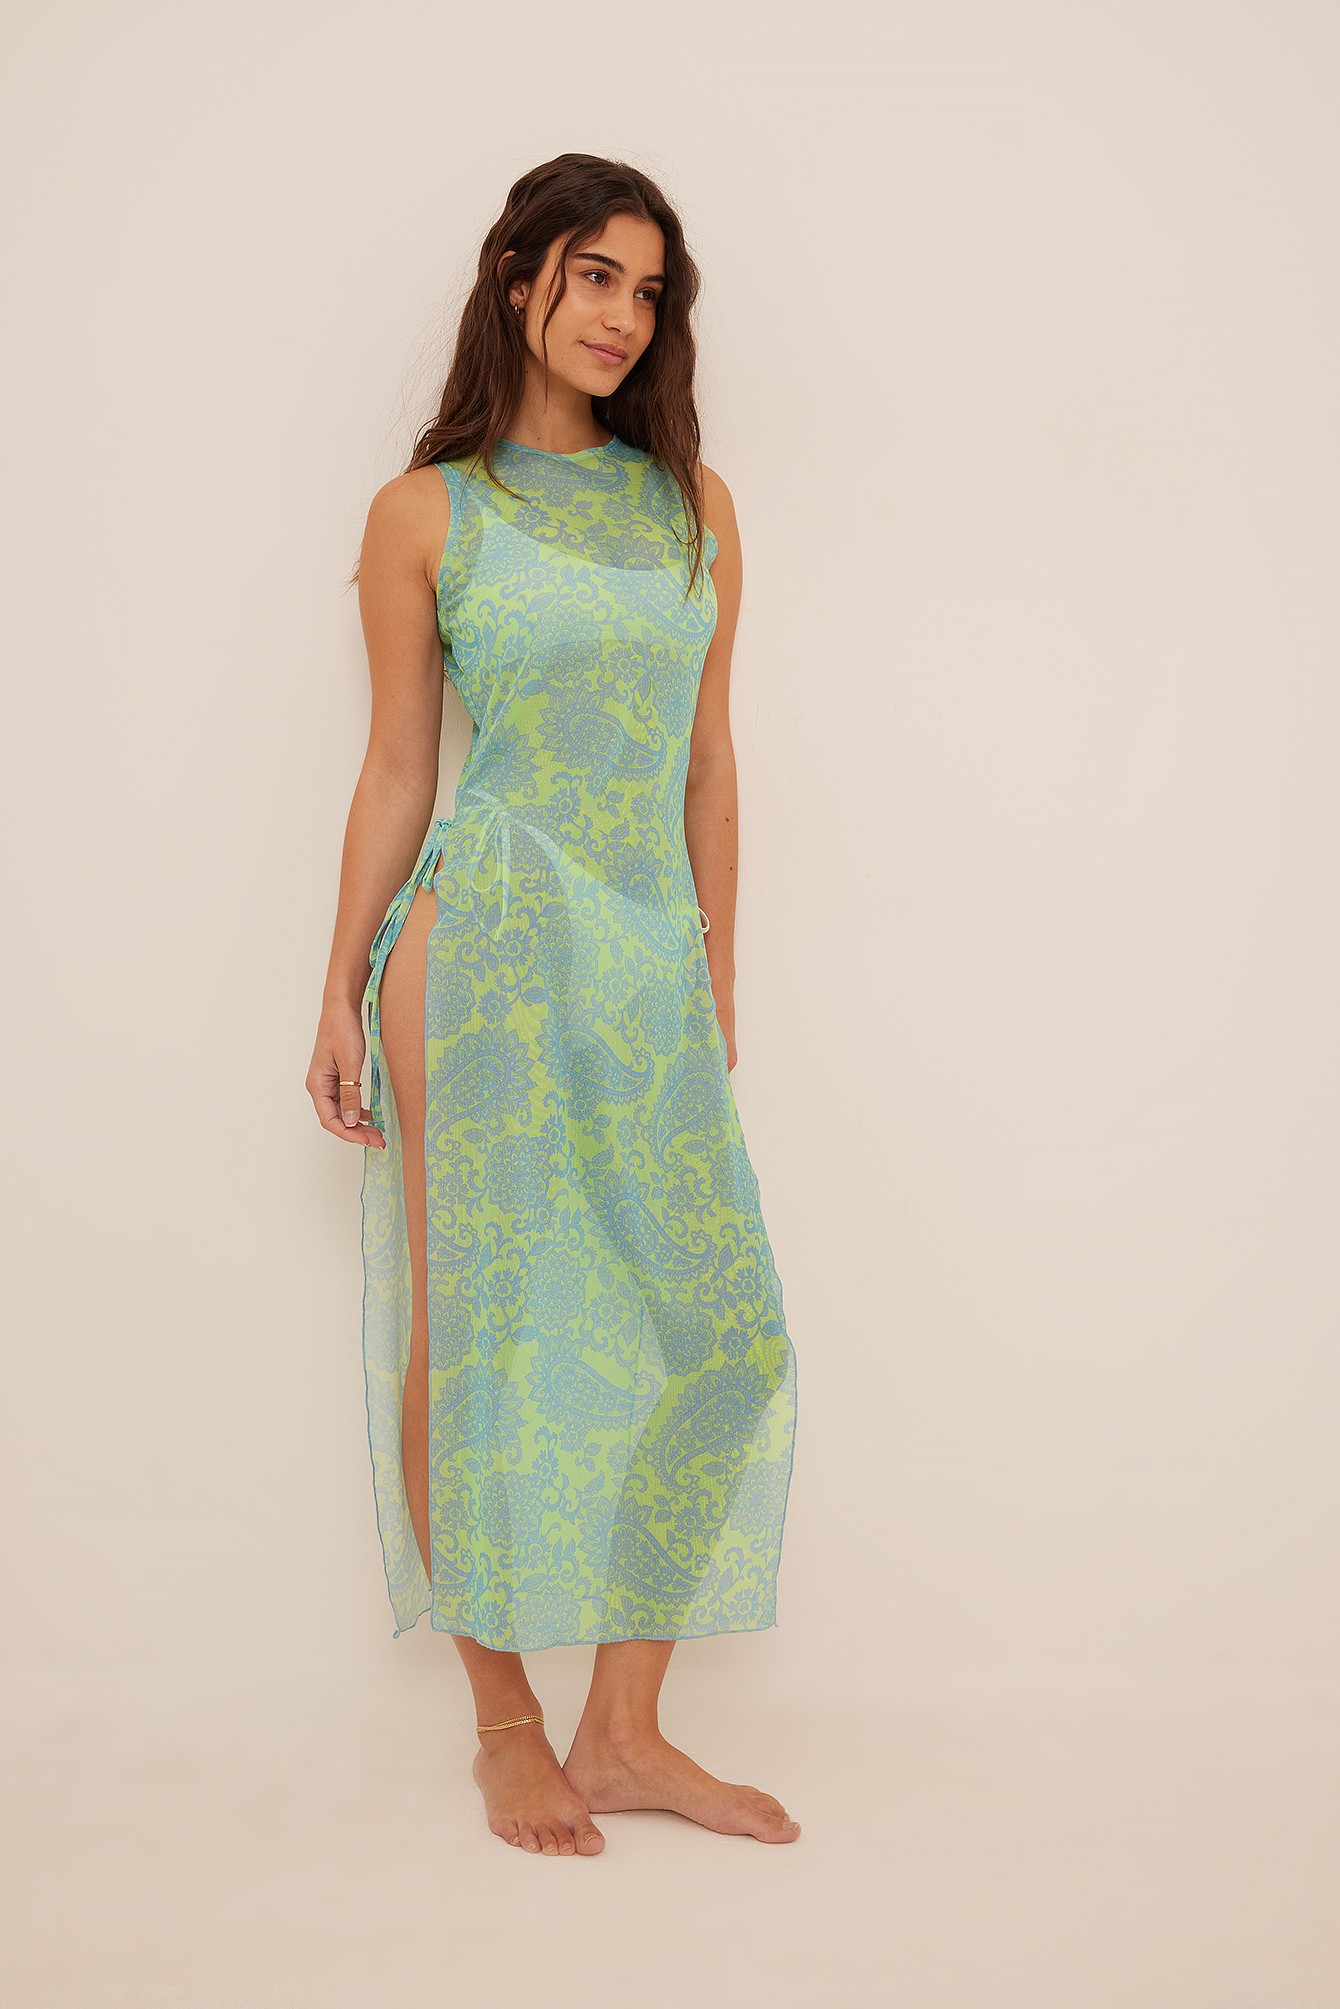 Blue Paisley Mesh Cover Up Dress